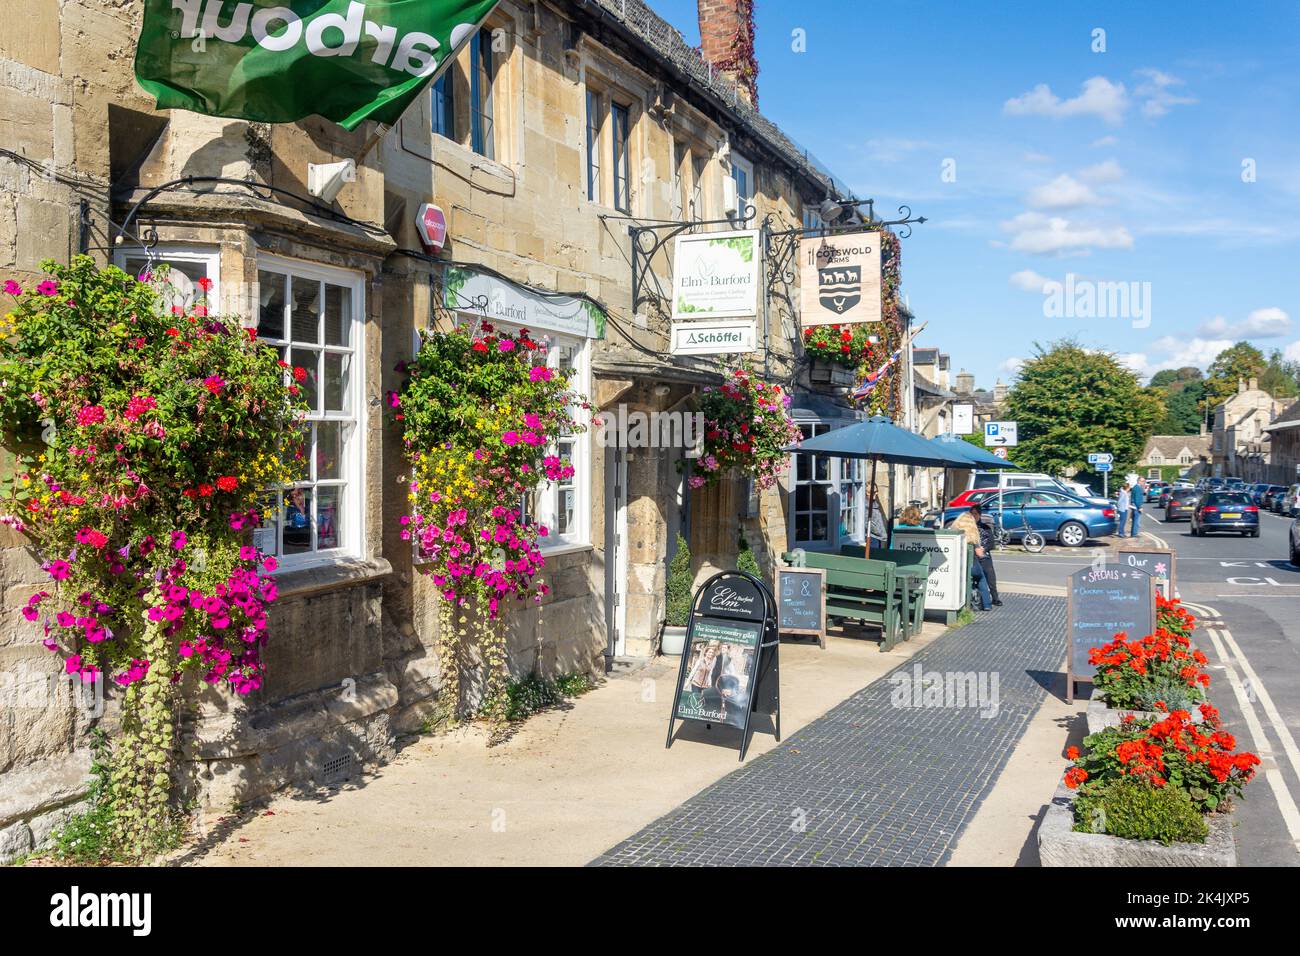 Elm of Burford clothing store and Cotswold Arms, High Street, Burford, Oxfordshire, England, United Kingdom Stock Photo